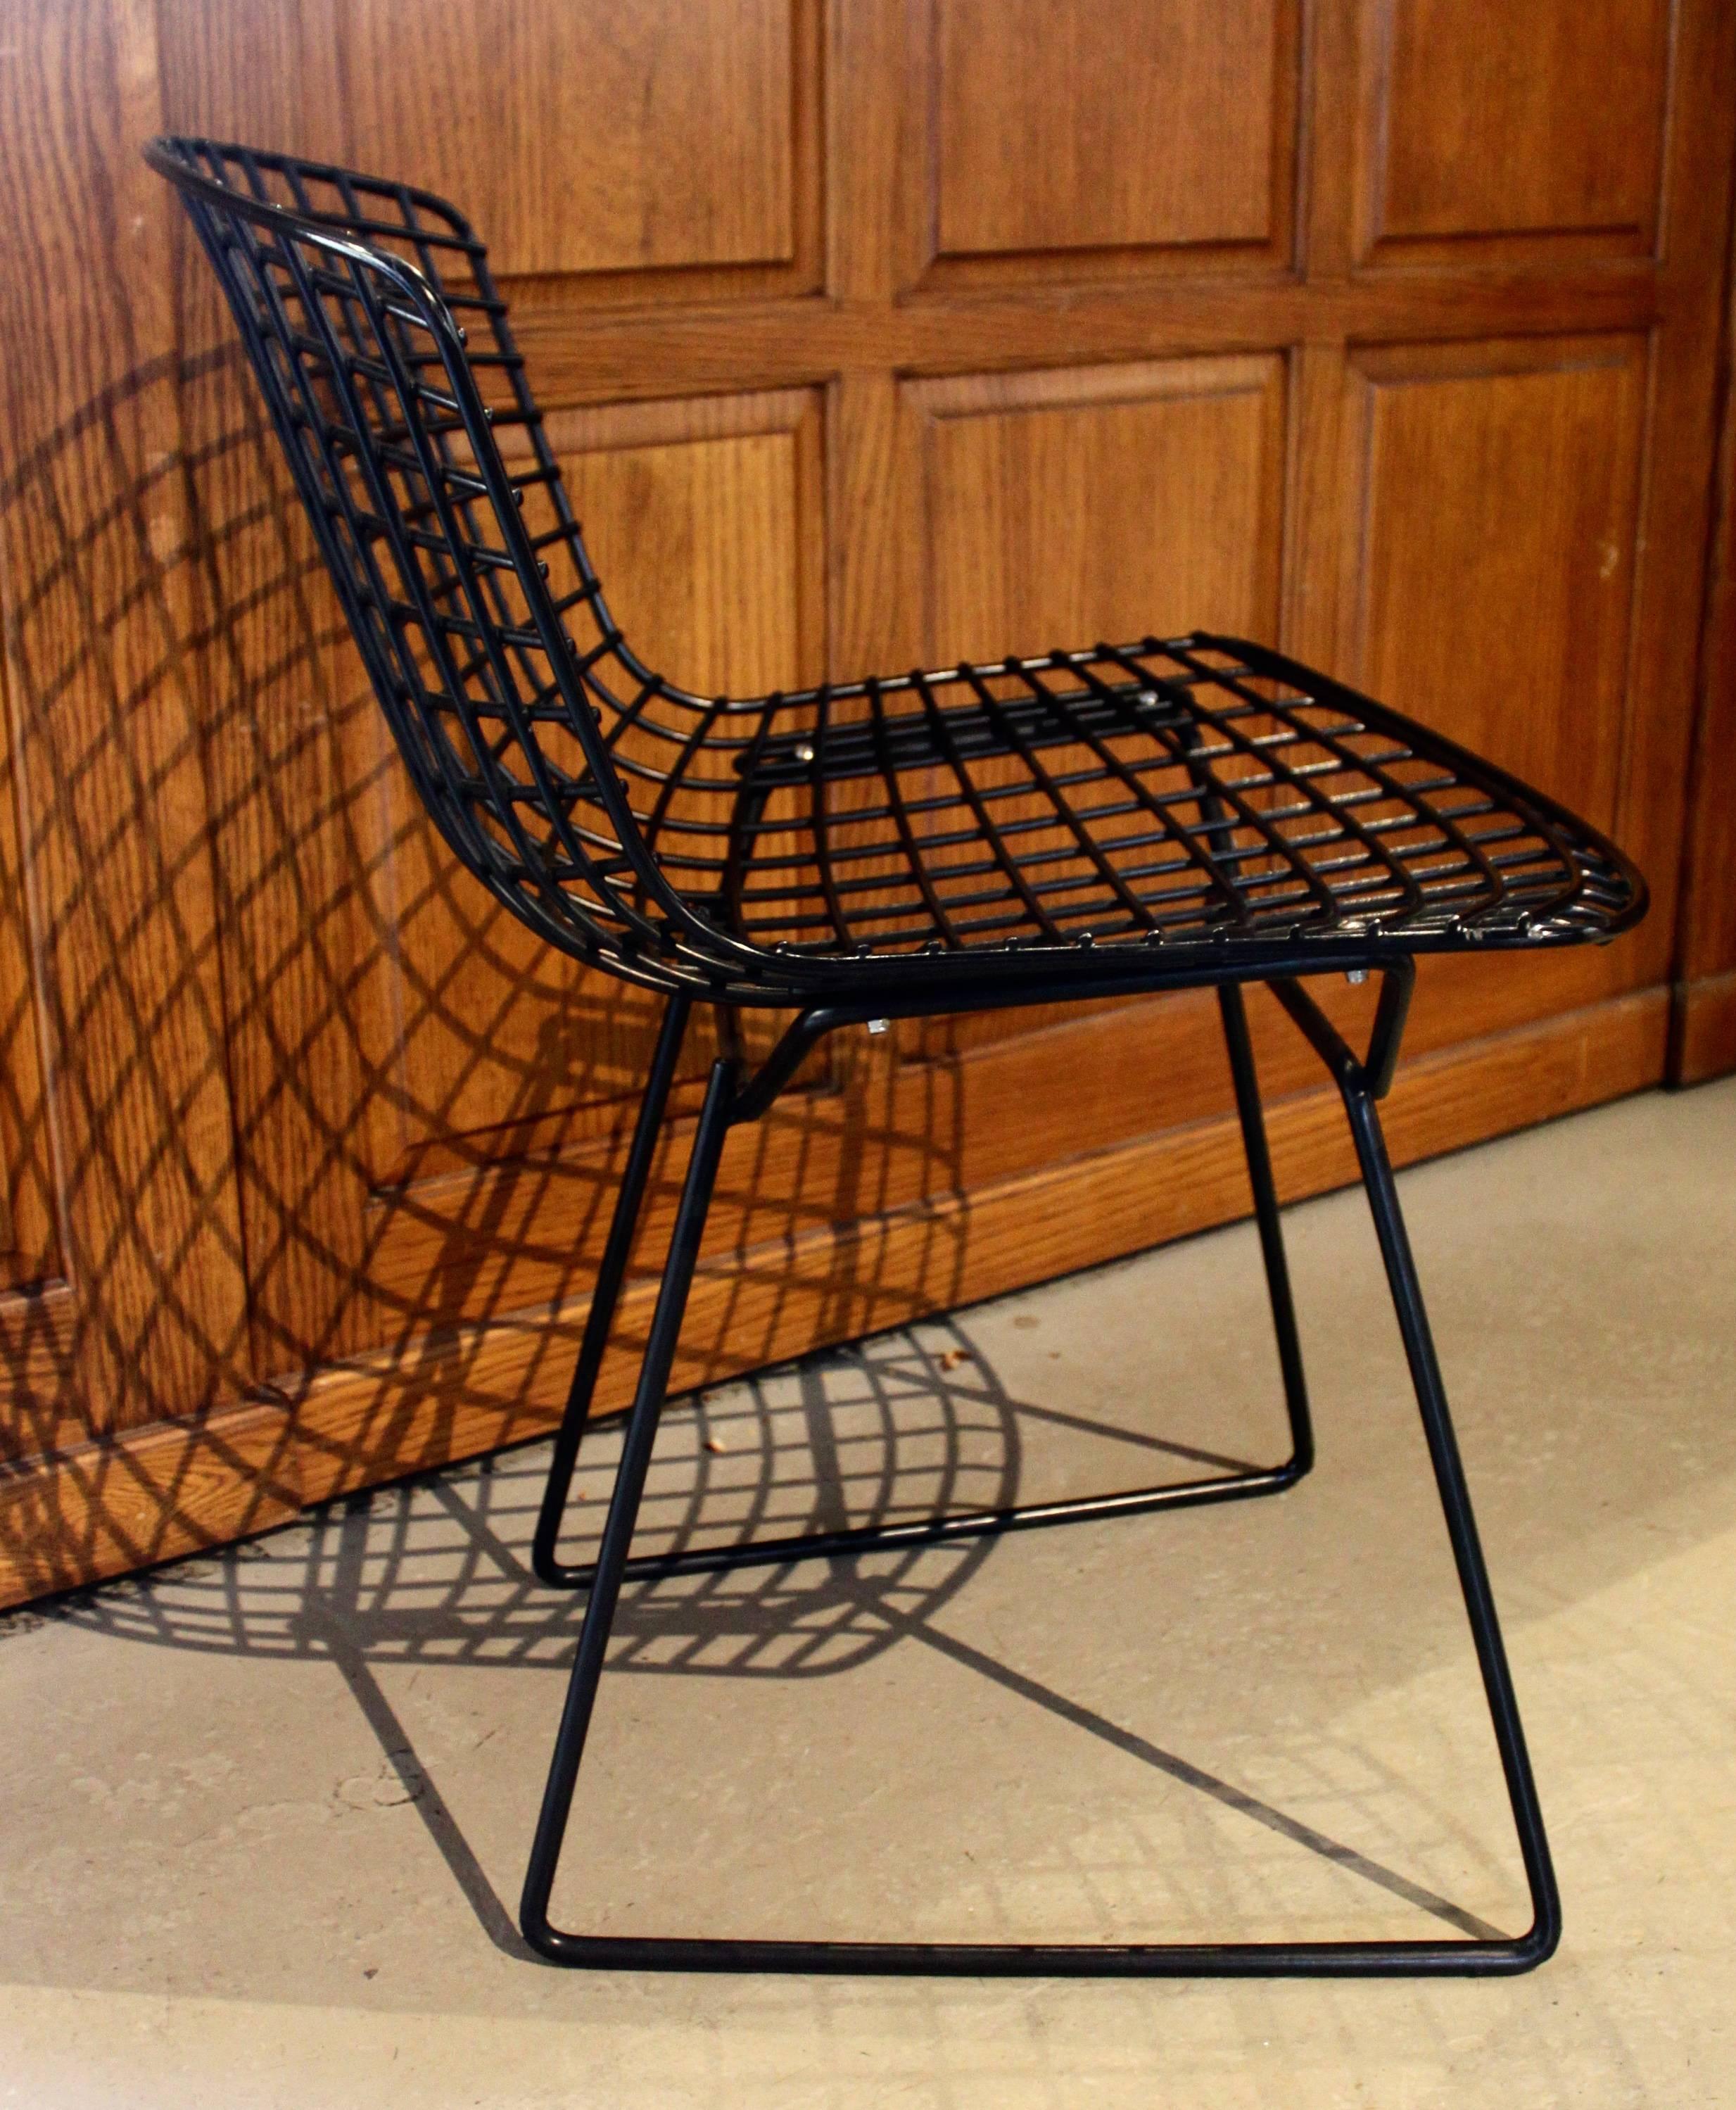 Bertoia side chairs by Knoll. Bottom of the feet shows wear. 